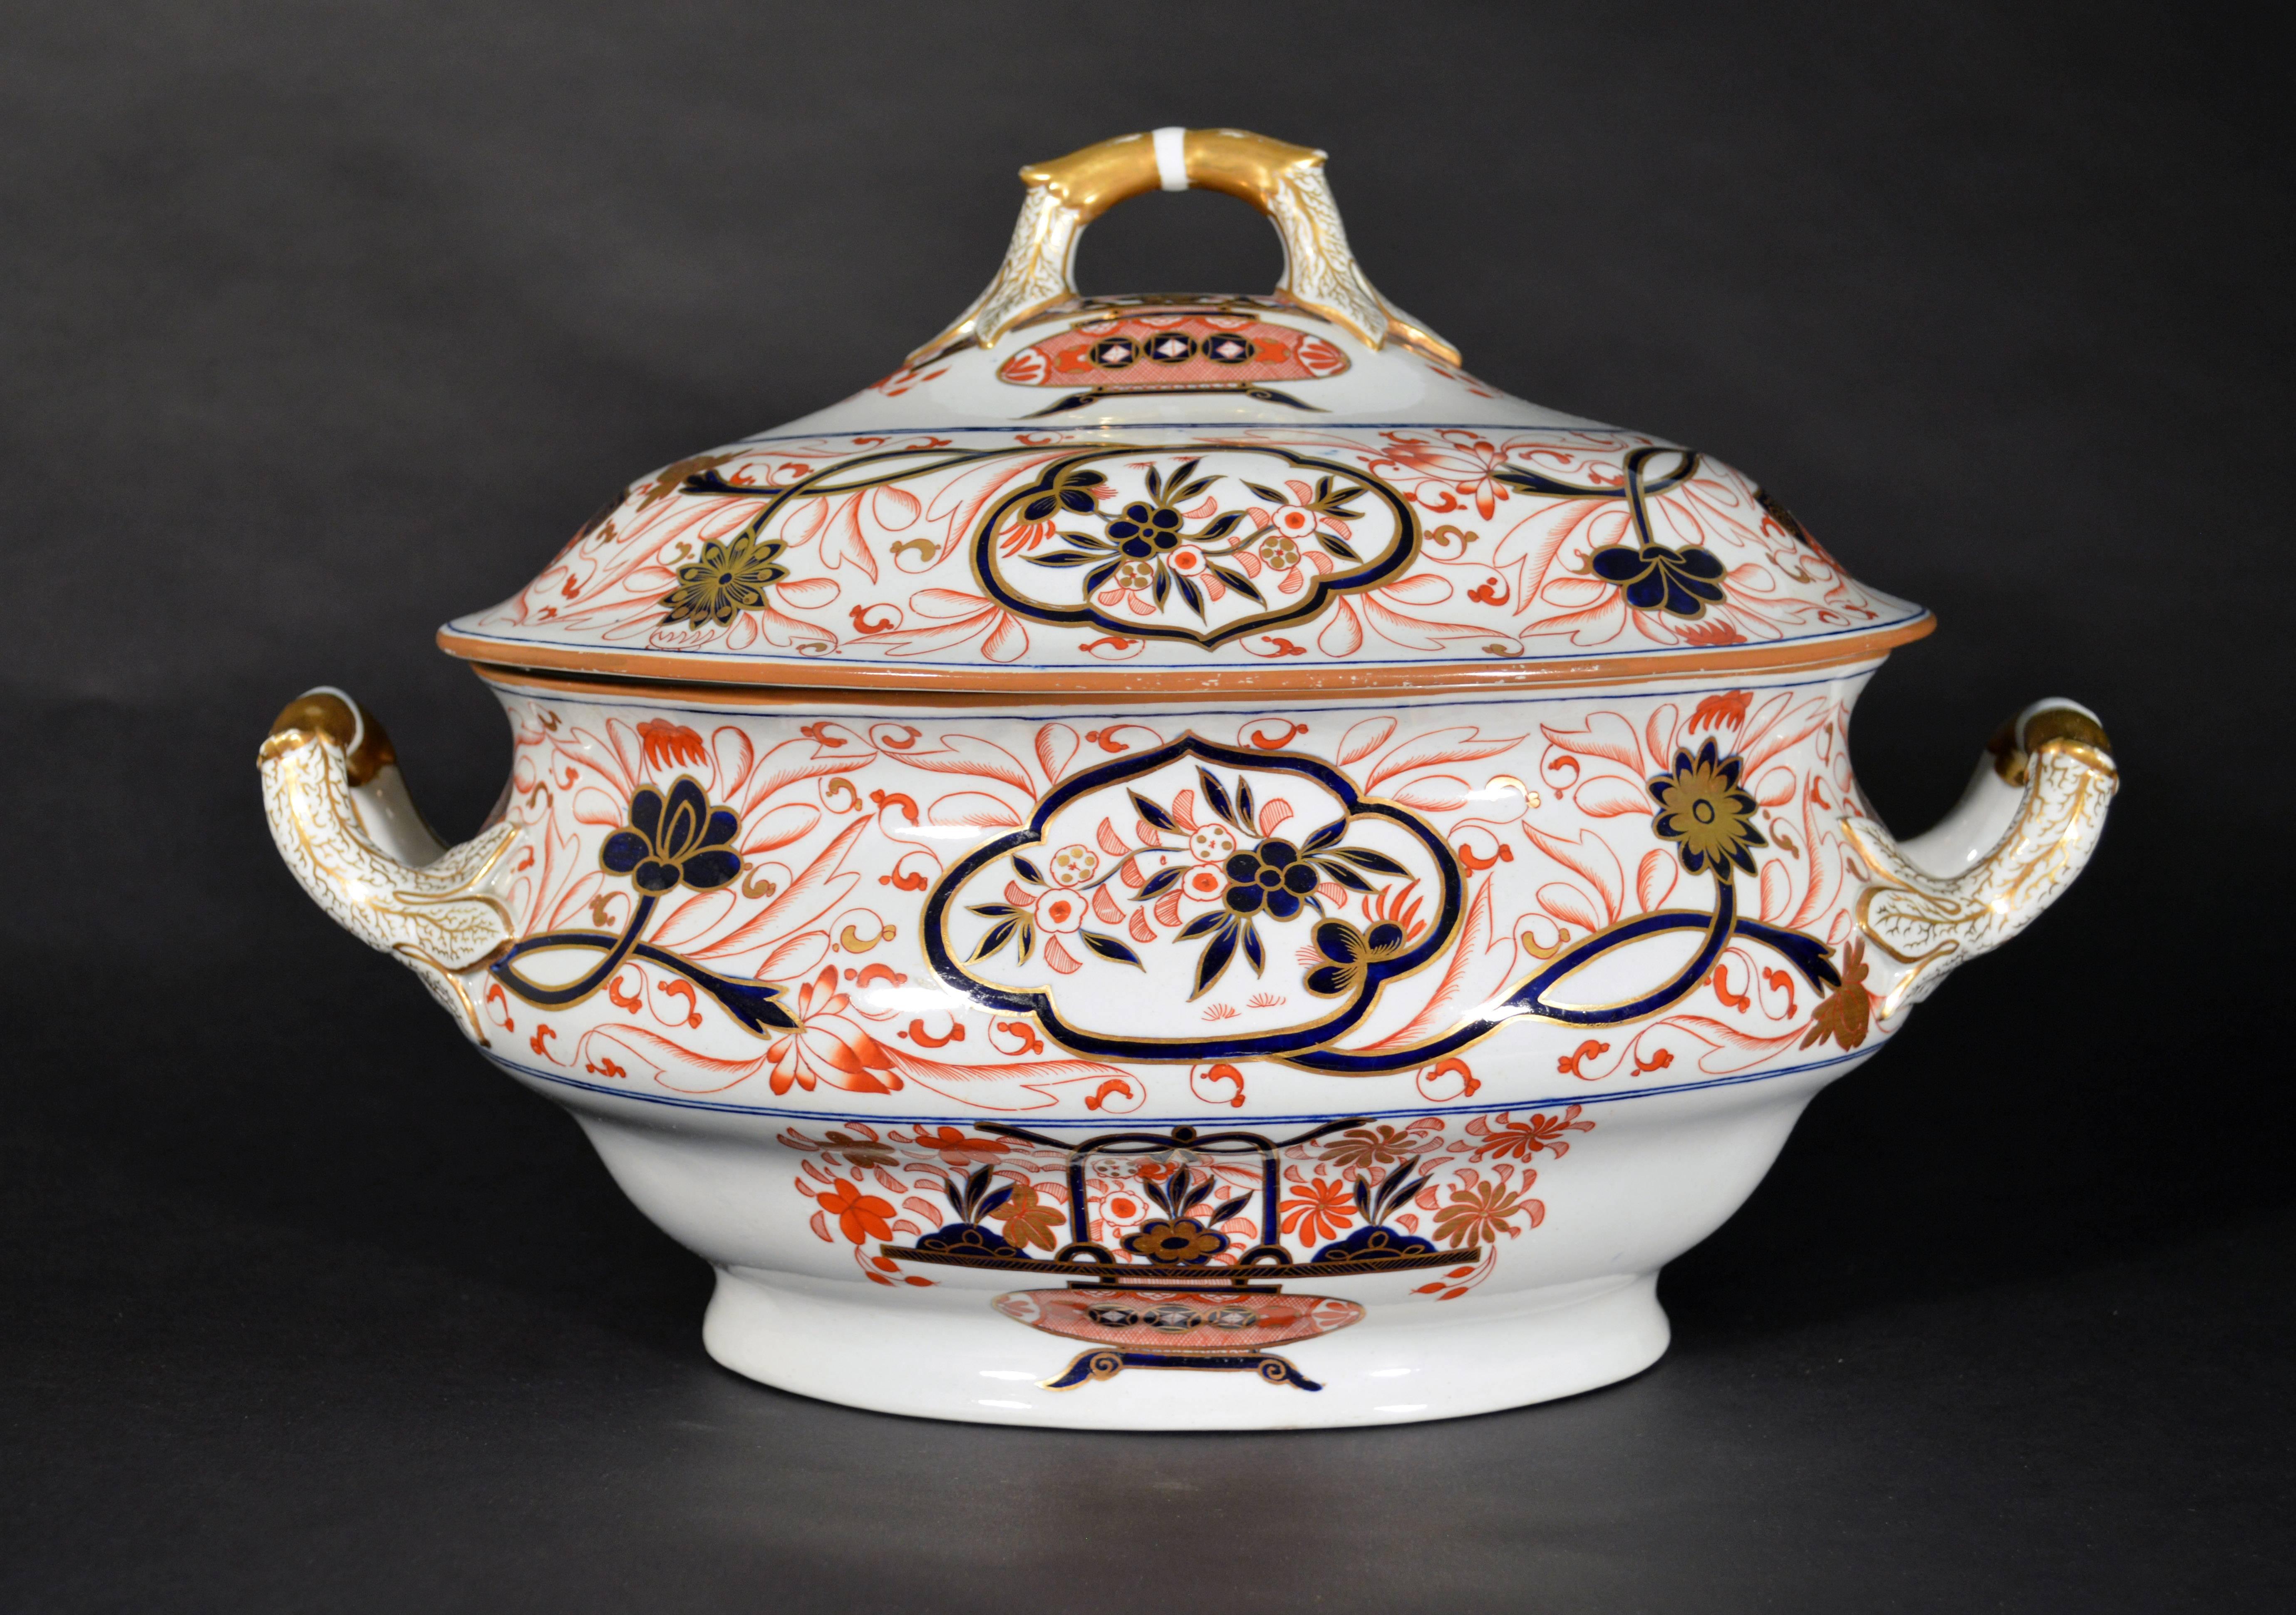 Regency Imari Pattern New Stone China Ironstone Soup Tureen, Cover and Stand